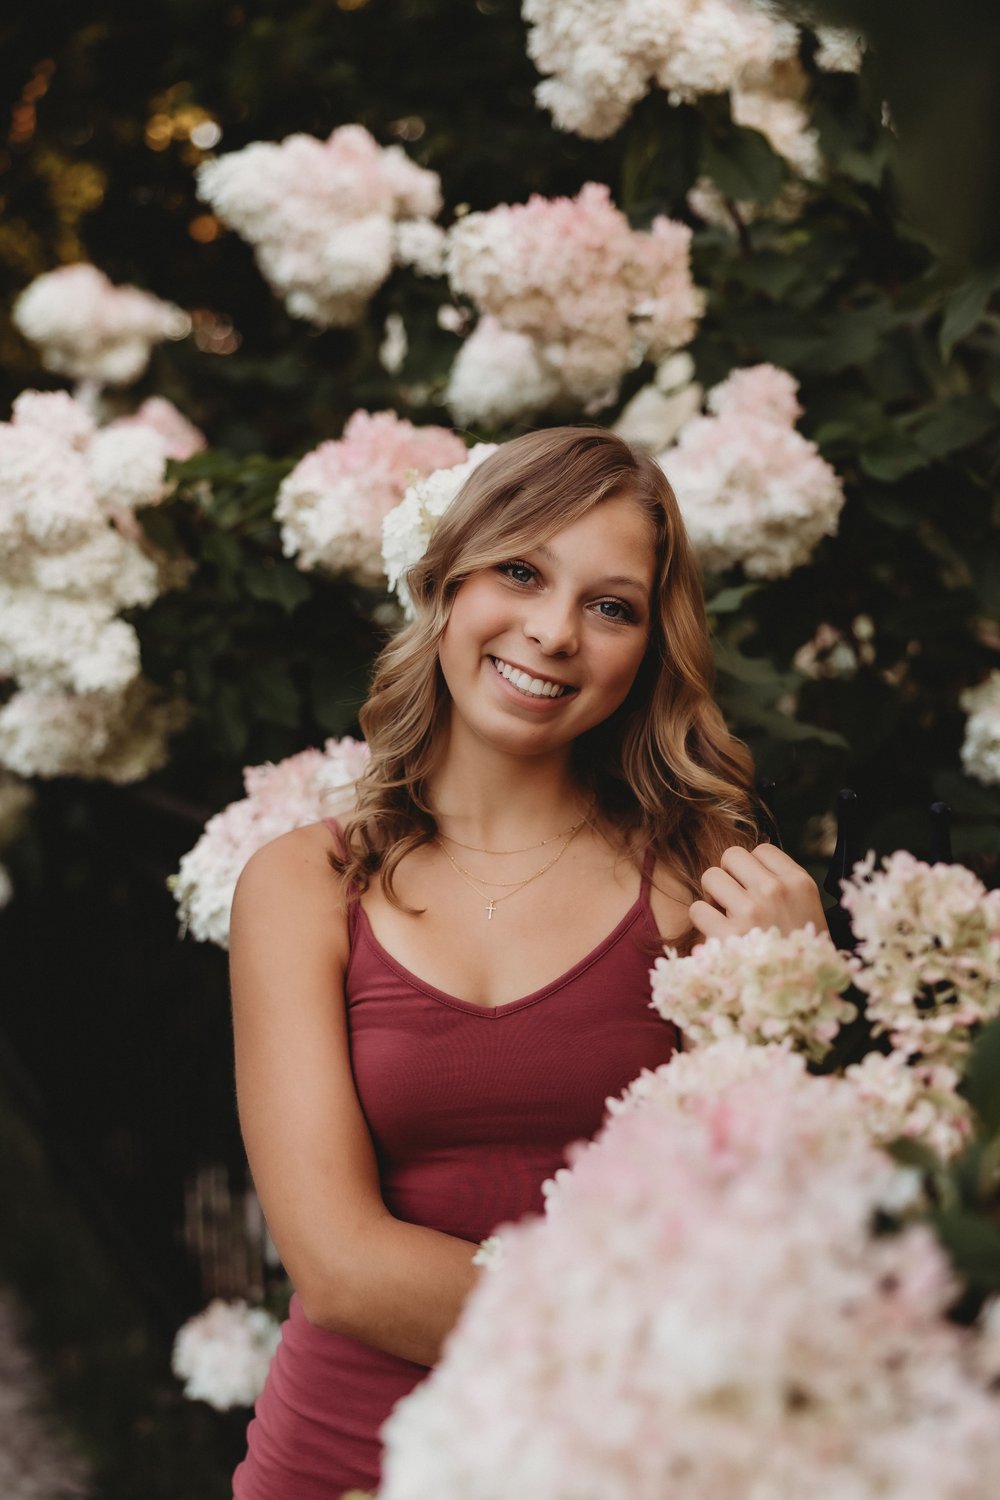  during senior portraits addie smiles standing in the middle of a hydrangea bush  